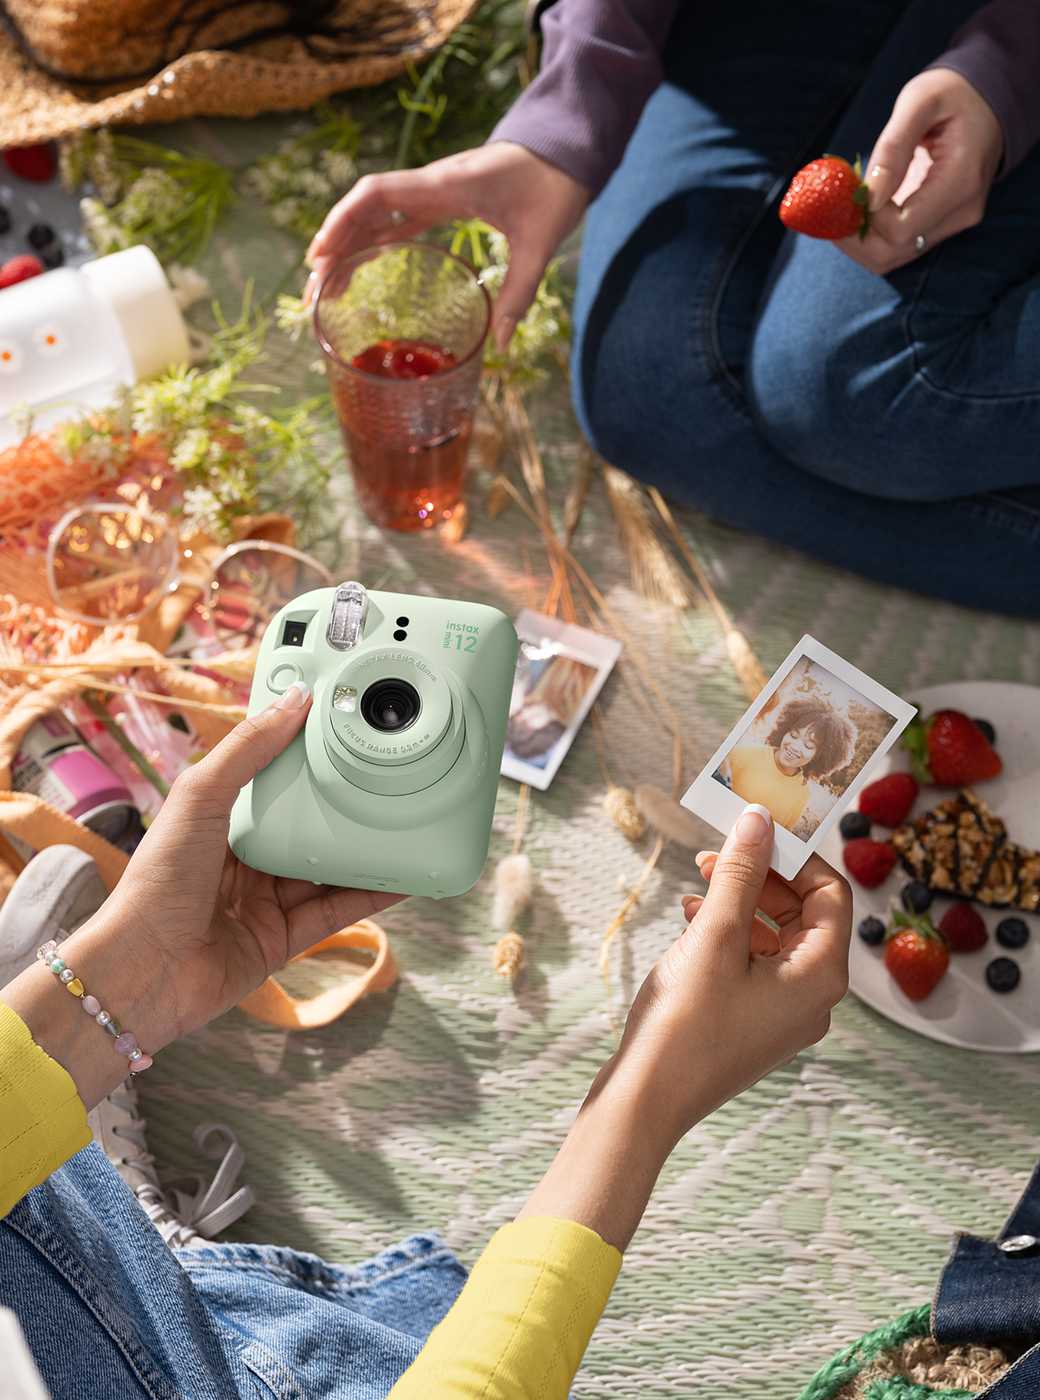 Instant cameras. Print out your best snaps.